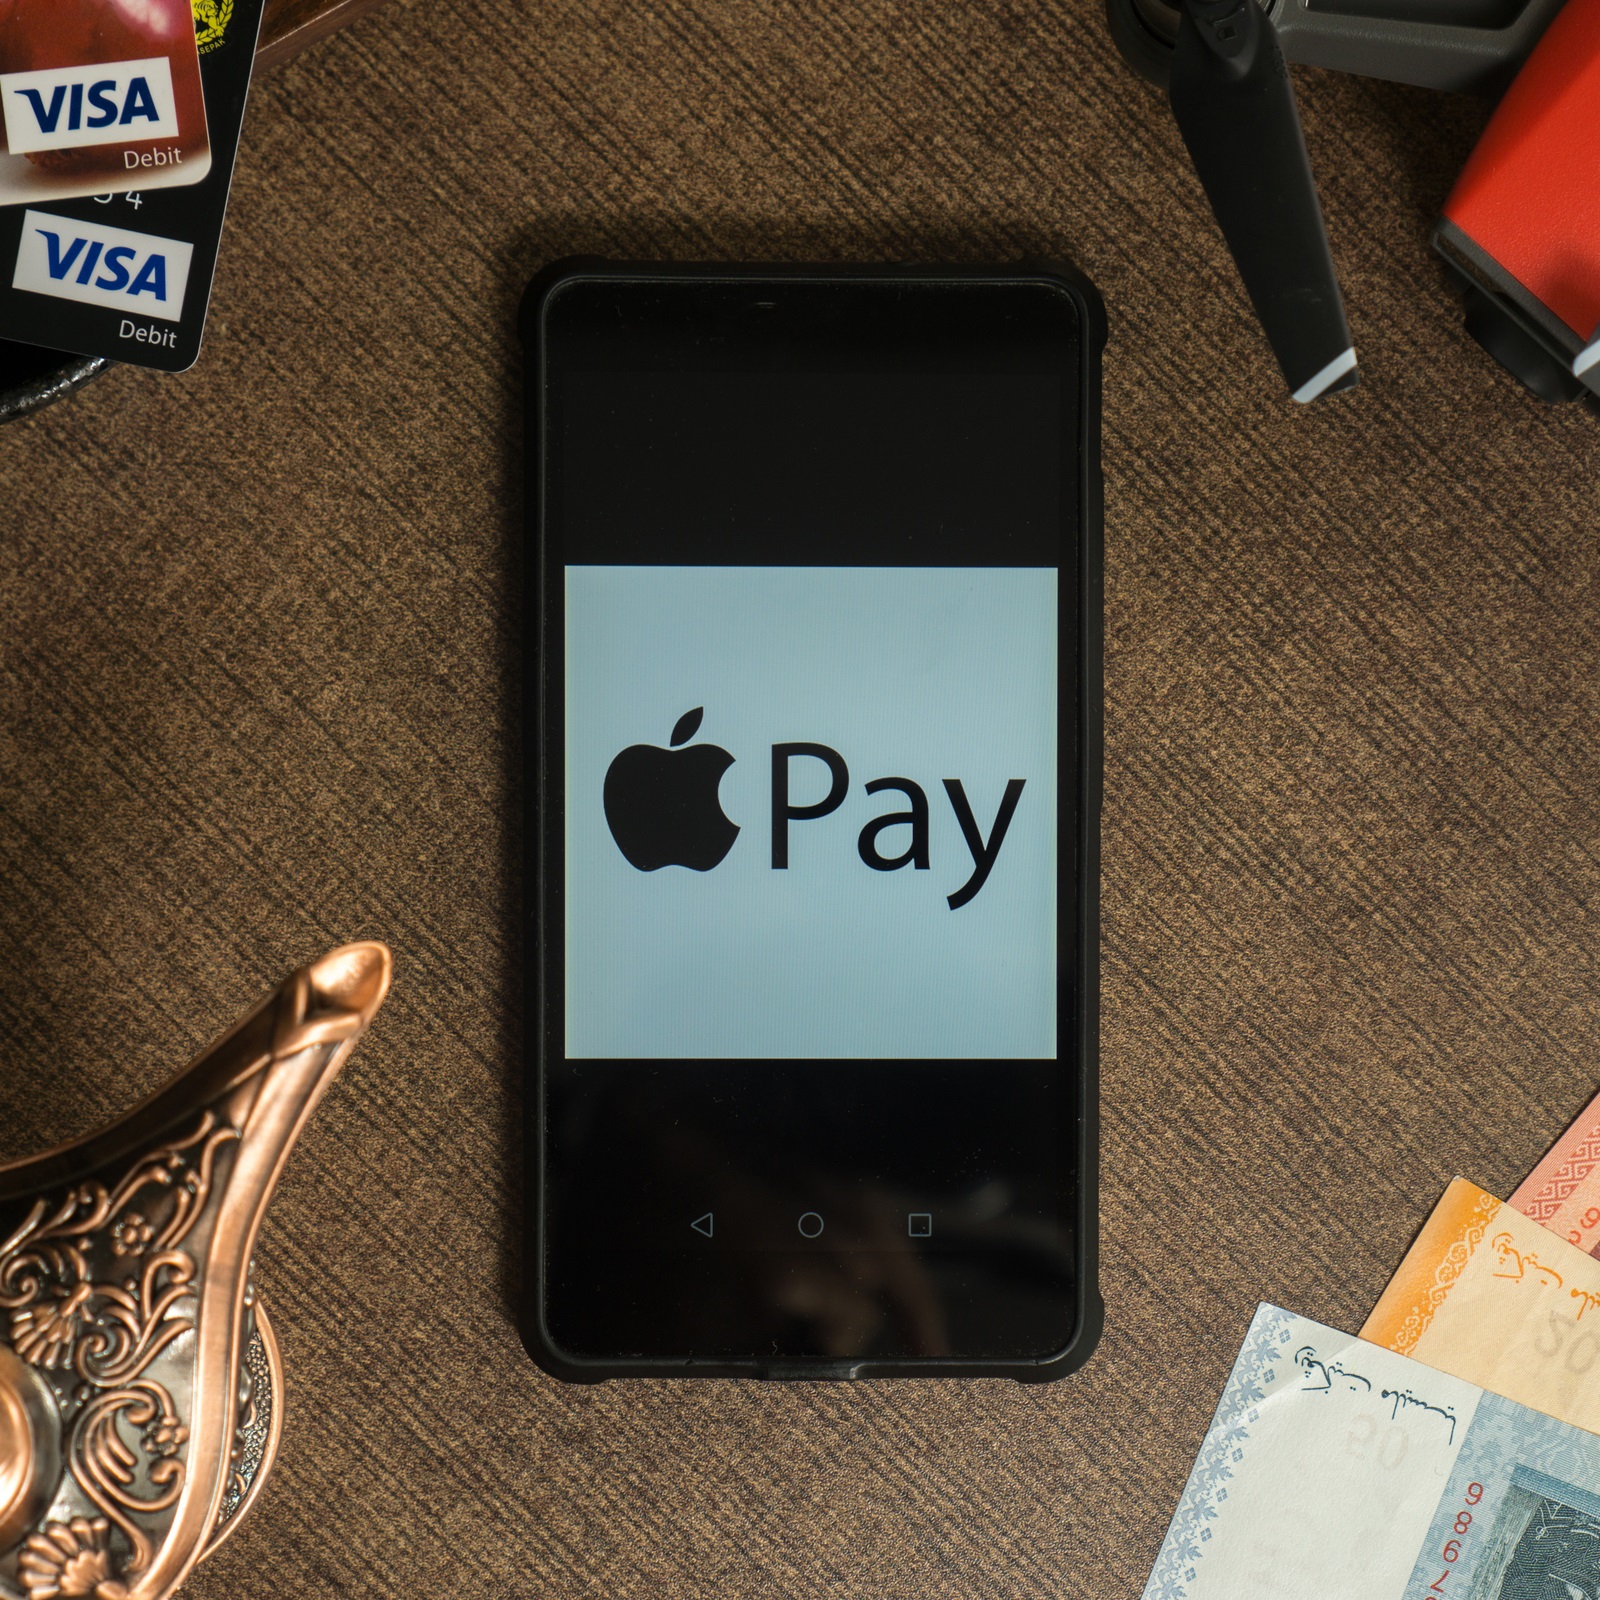 buy bitcoin instantly with apple pay